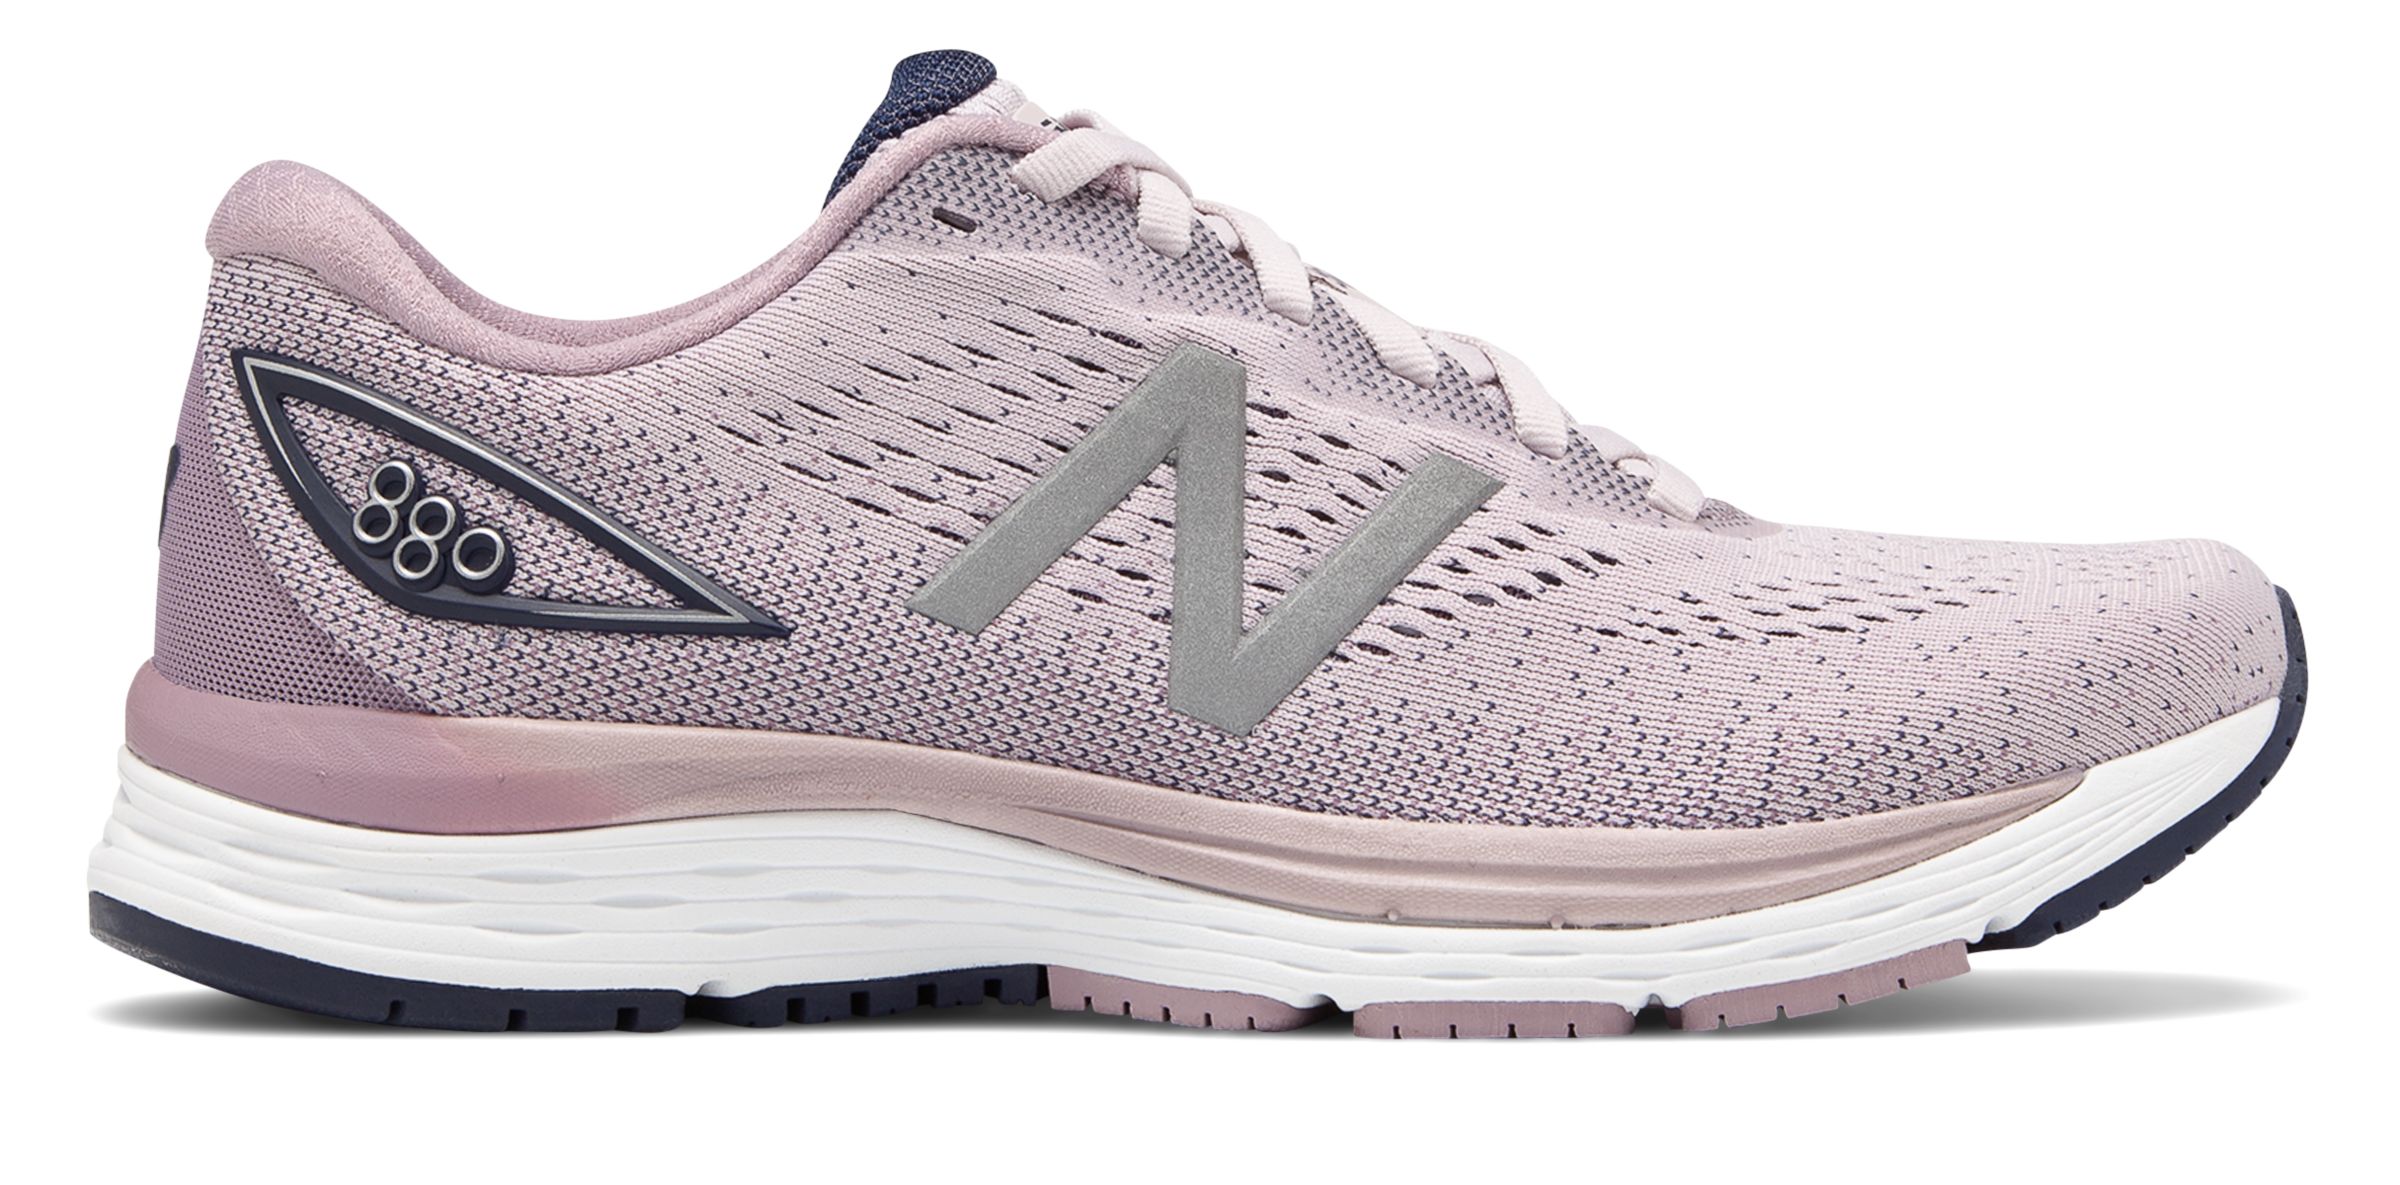 New Balance W880-V9 on Sale - Discounts Up to 52% Off on W880CP9 at Joe's New  Balance Outlet